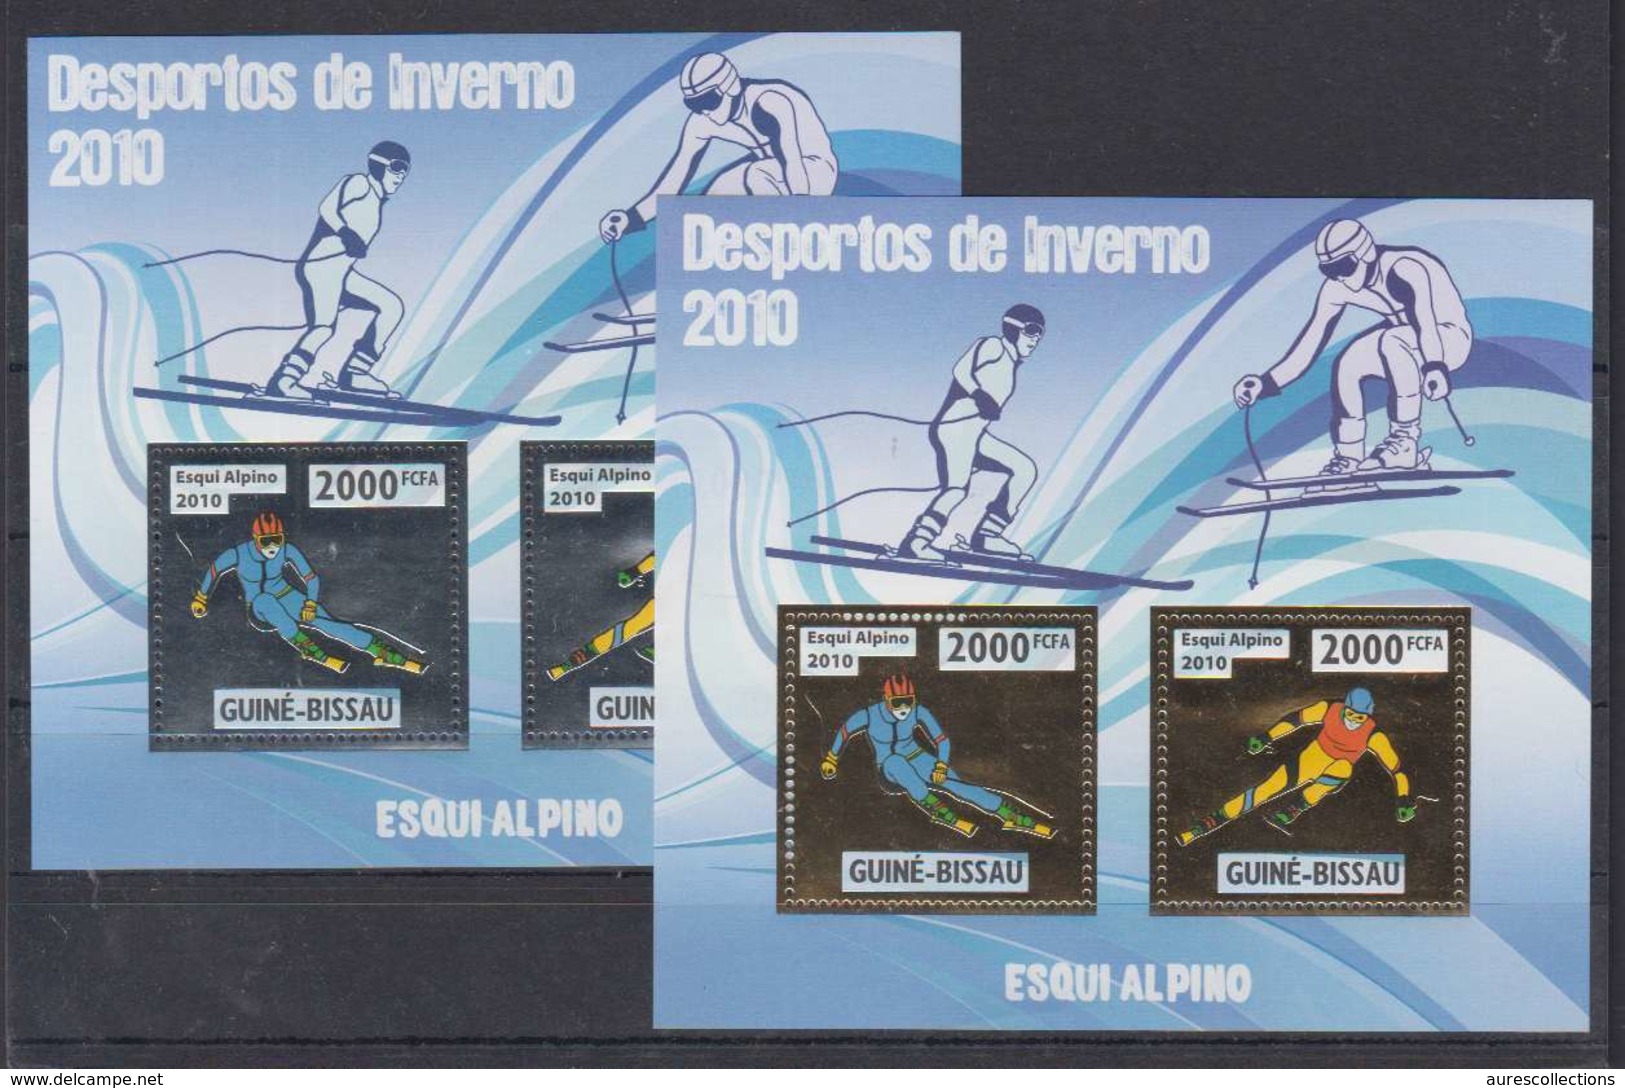 GUINEE BISSAU GUINE 2010 - WINTER OLYMPIC SPORT GAMES VANCOUVER -  SKI ALPIN ALPINE SKIING - GOLD + SILVER - RARE MNH - Hiver 2010: Vancouver